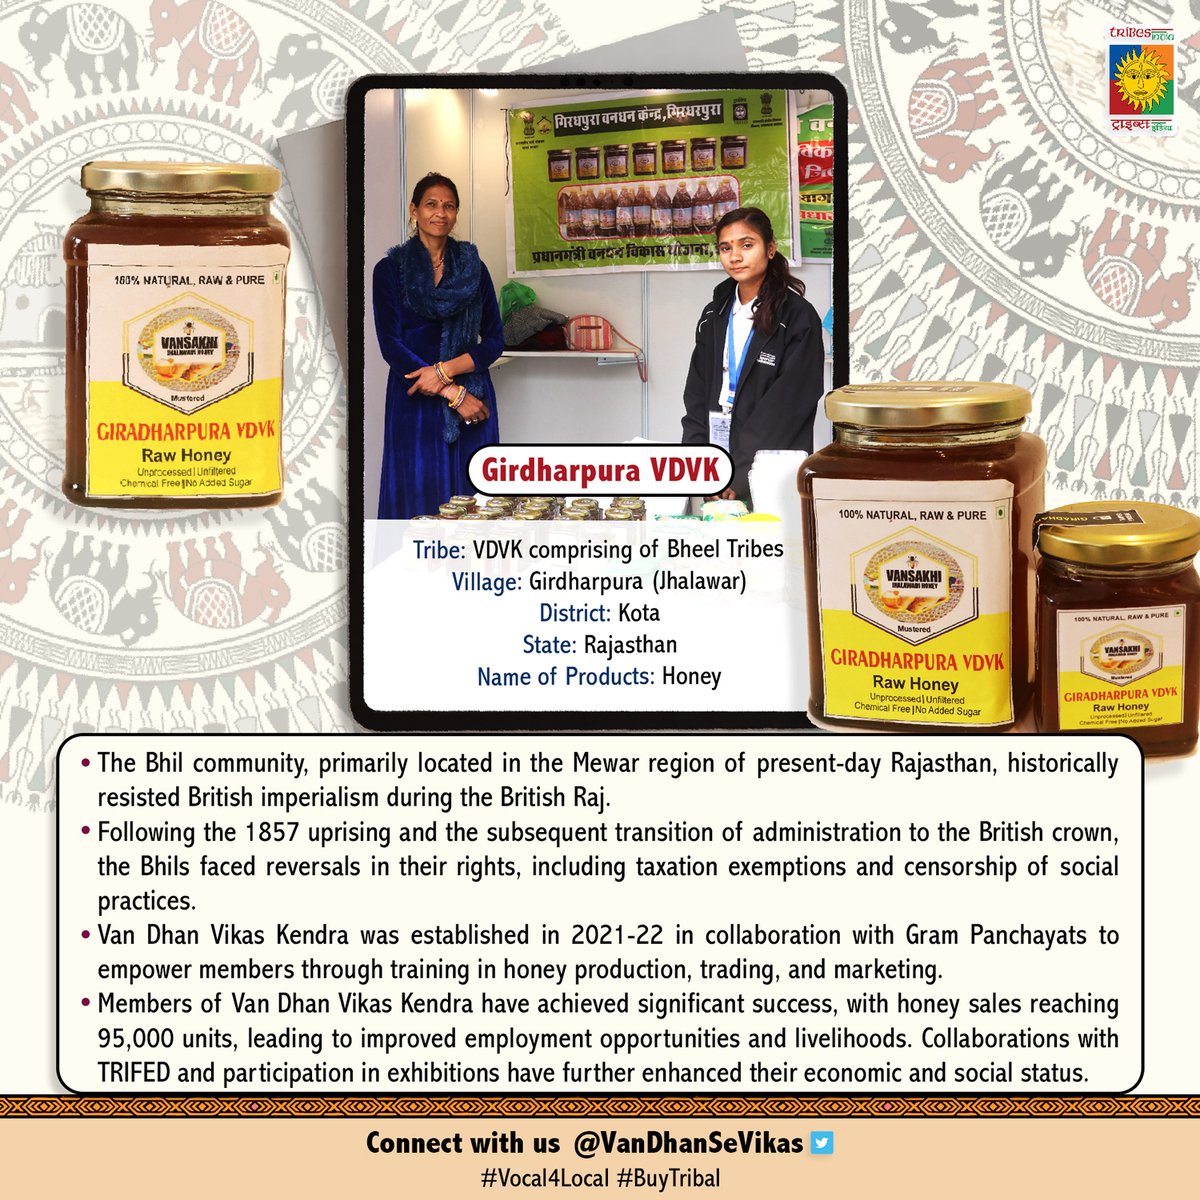 Girdharpura VDVK,a Bheel tribe village in Rajasthan, saw a remarkable upliftment through Van Dhan Vikas Yojana. With #TRIFED's support, they boosted #OrganicHoney production, improved marketing, & sales, empowering their community economically & socially.

#Vocal4Local #BuyTribal